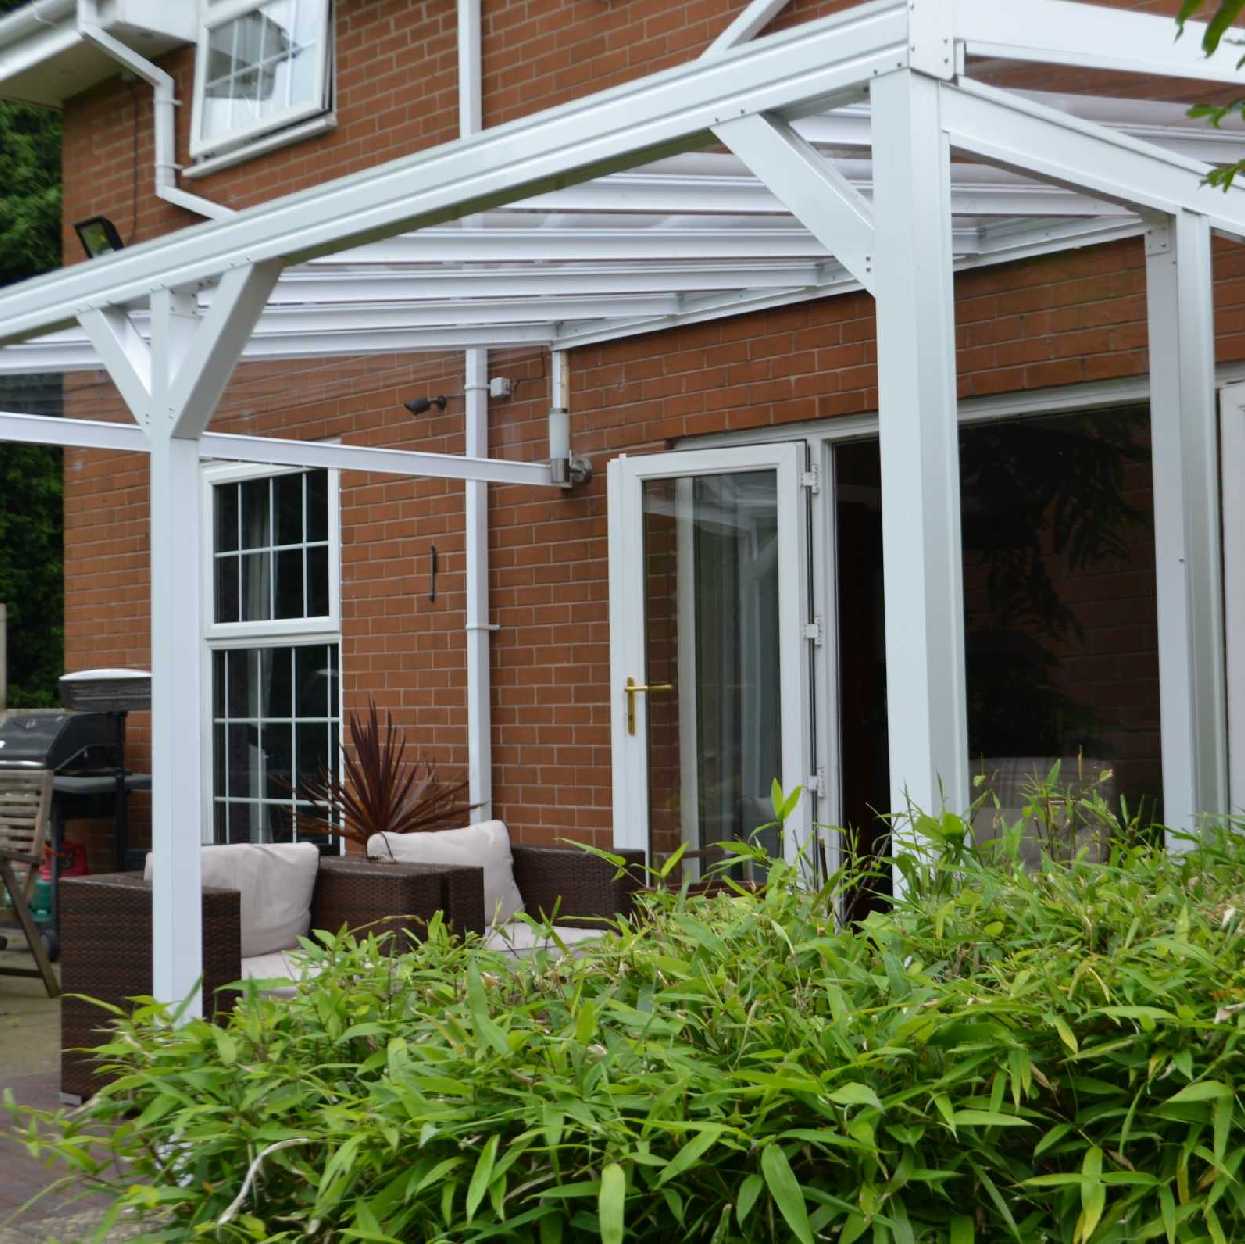 Omega Smart Lean-To Canopy, White with 6mm Glass Clear Plate Polycarbonate Glazing - 8.4m (W) x 2.5m (P), (4) Supporting Posts from Omega Build